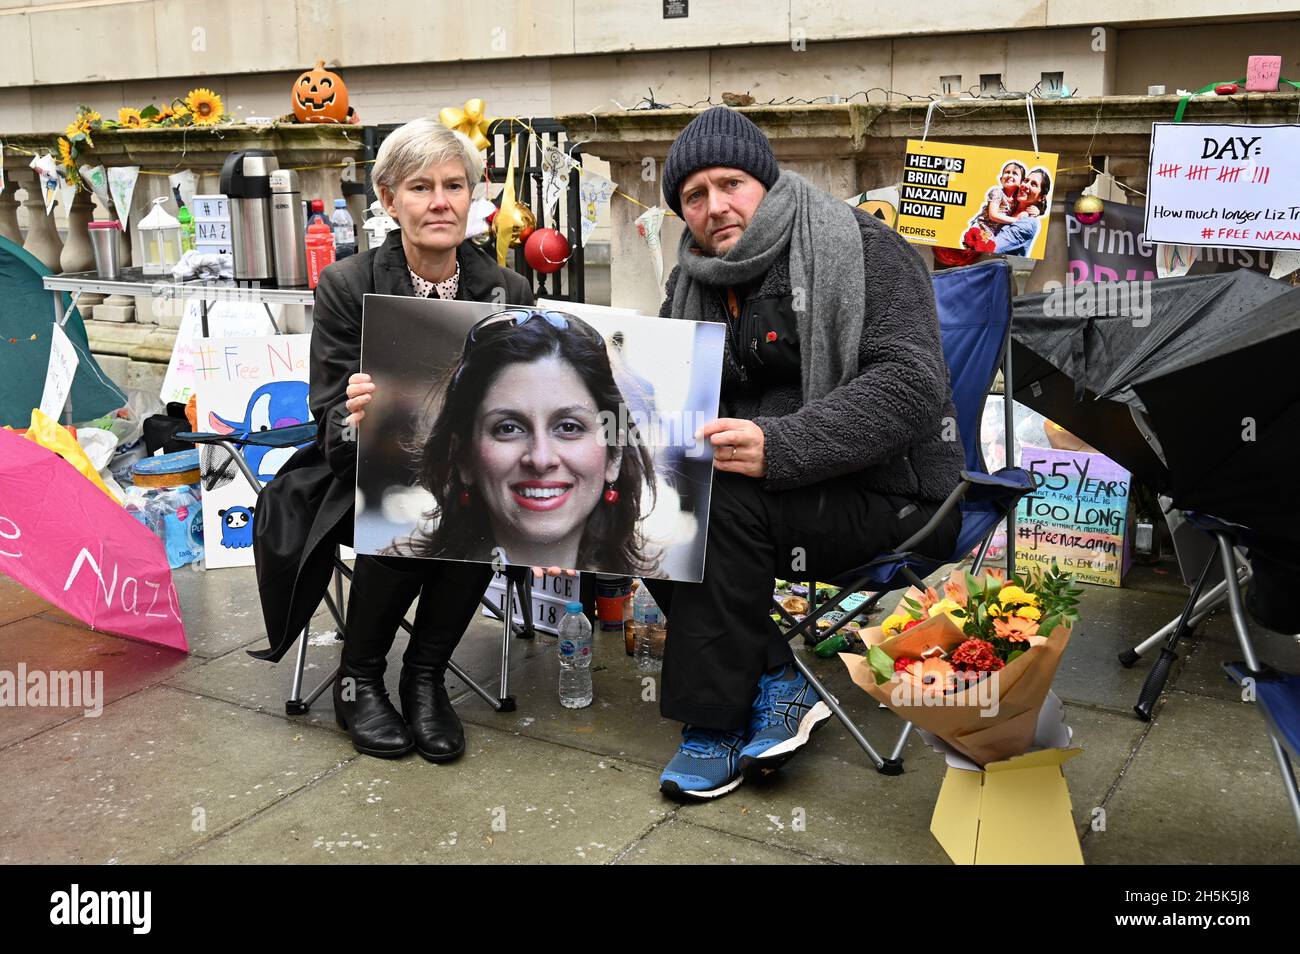 London, UK. Kate Green MP met Richard Ratcliffe now on day eighteen of his hunger strike outside the Foreign Office. He is demonstrating about the lack of progress from the Foreign Office in securing a release for his wife Nazanin Zaghari-Ratcliffe, during her five and a half year detainment in Iran. Credit: michael melia/Alamy Live News Stock Photo